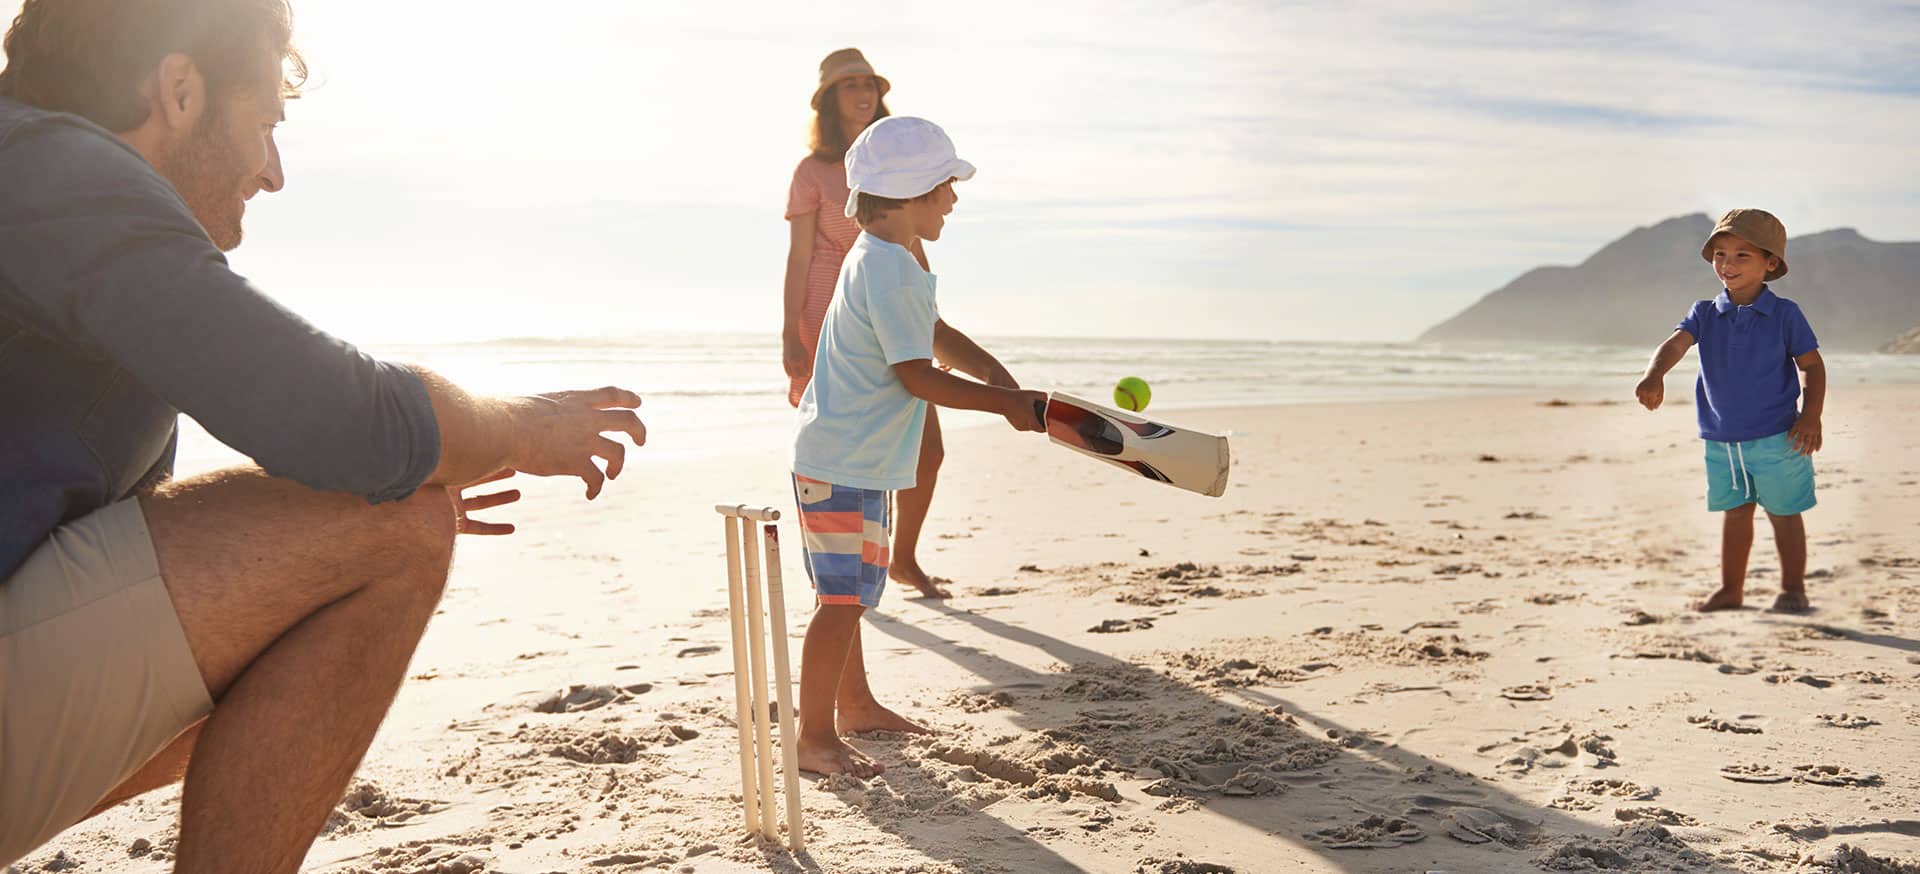 A family playing cricket on a beach.